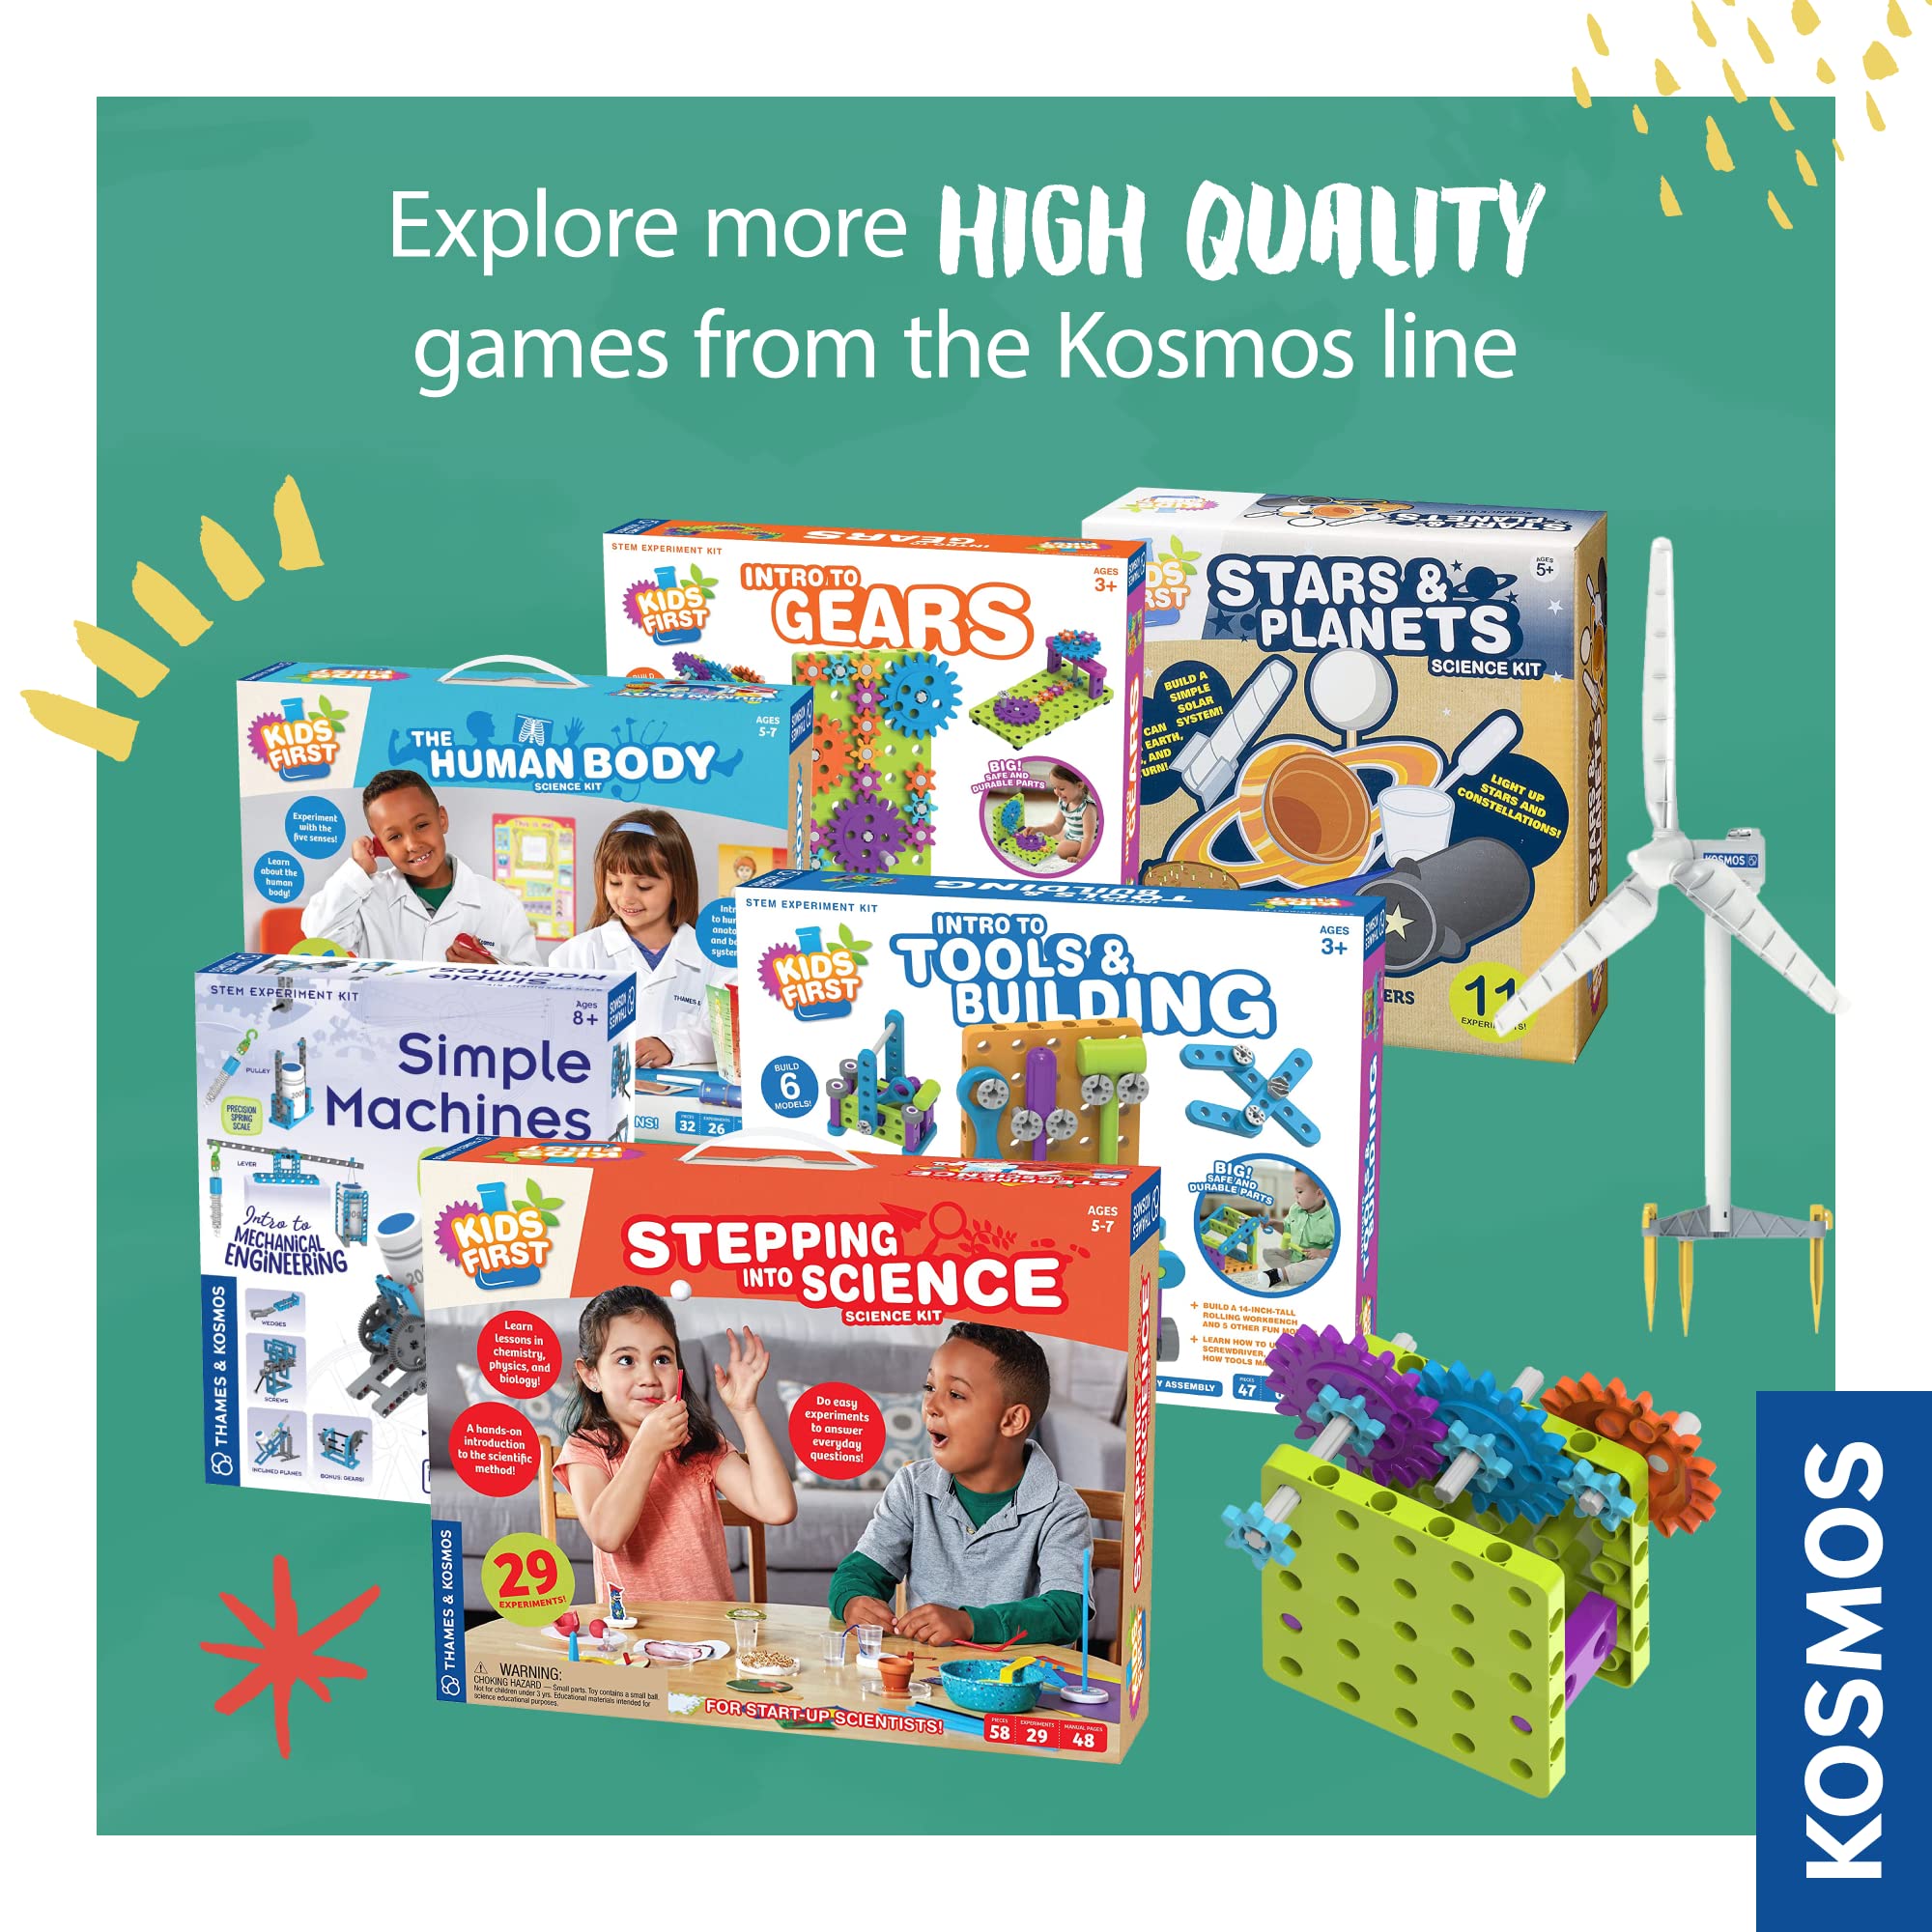 Thames & Kosmos Kids First: Intro to Gears STEM Experiment Kit for Ages 3+ | Build 4 Models, Learn About Gears, Power & Motion | Intro to Mechanical Engineering for Young Learners | Durable Parts